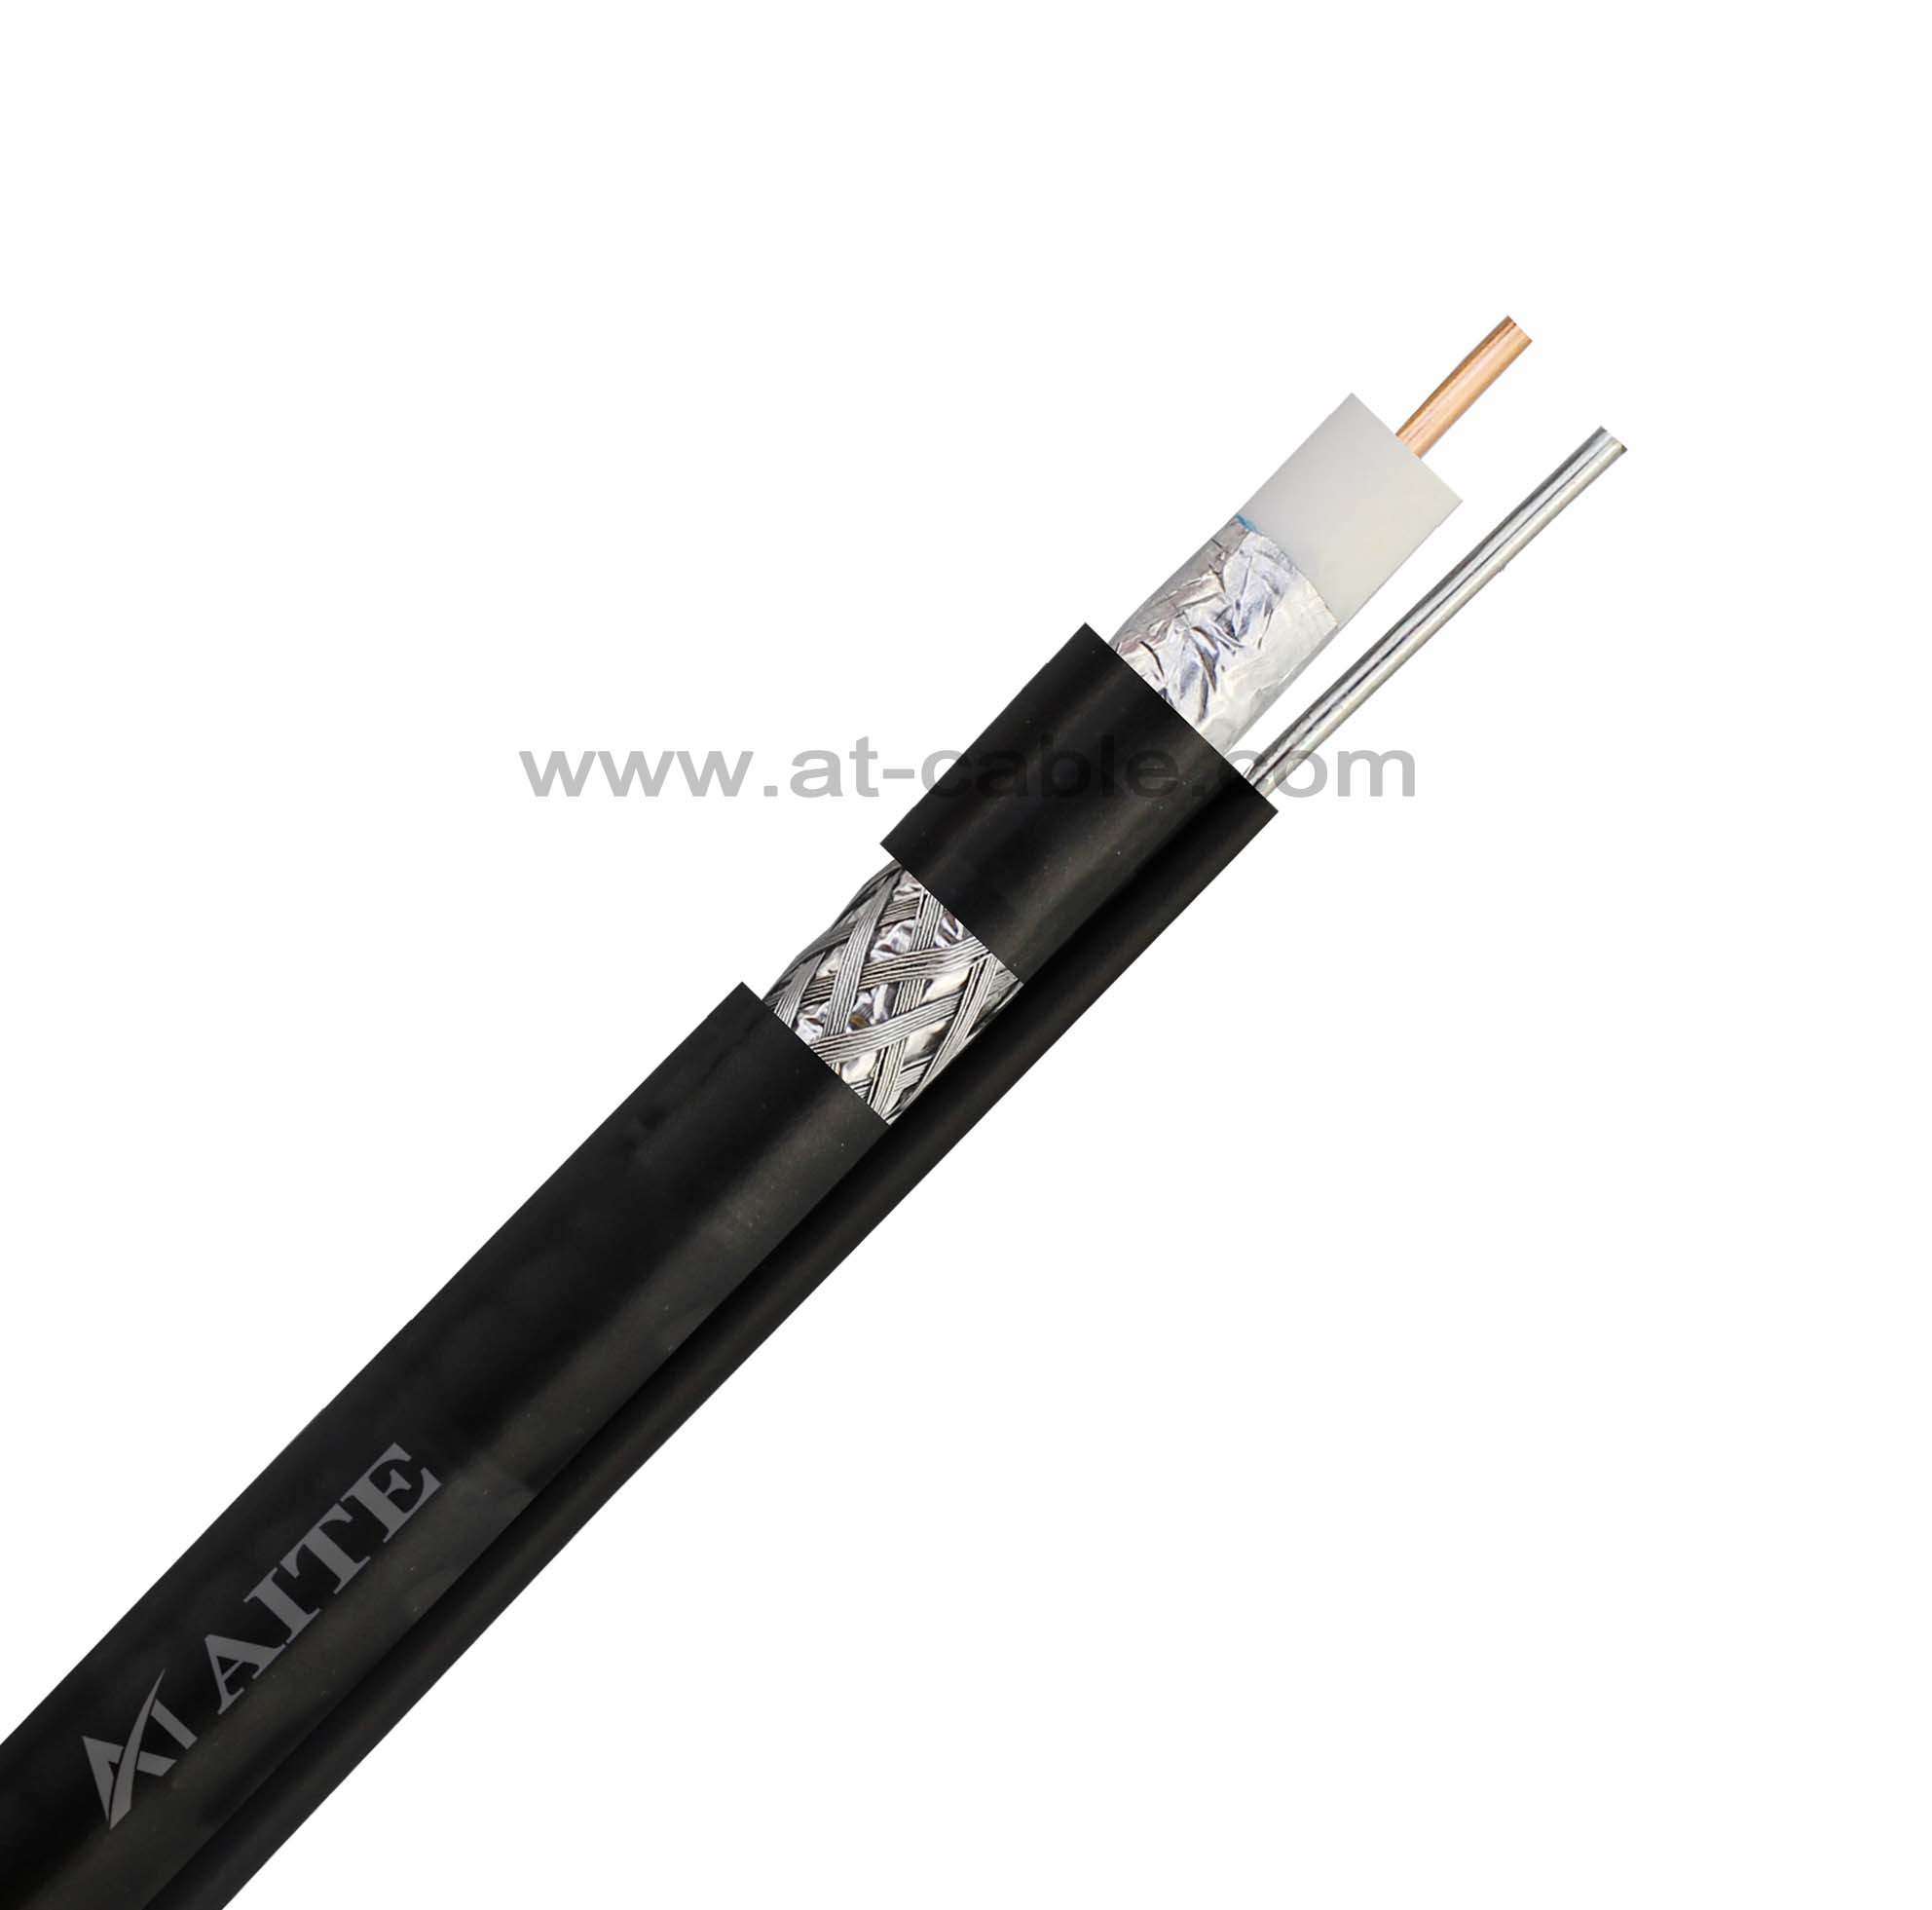 RG11-BVM Coaxial Cable